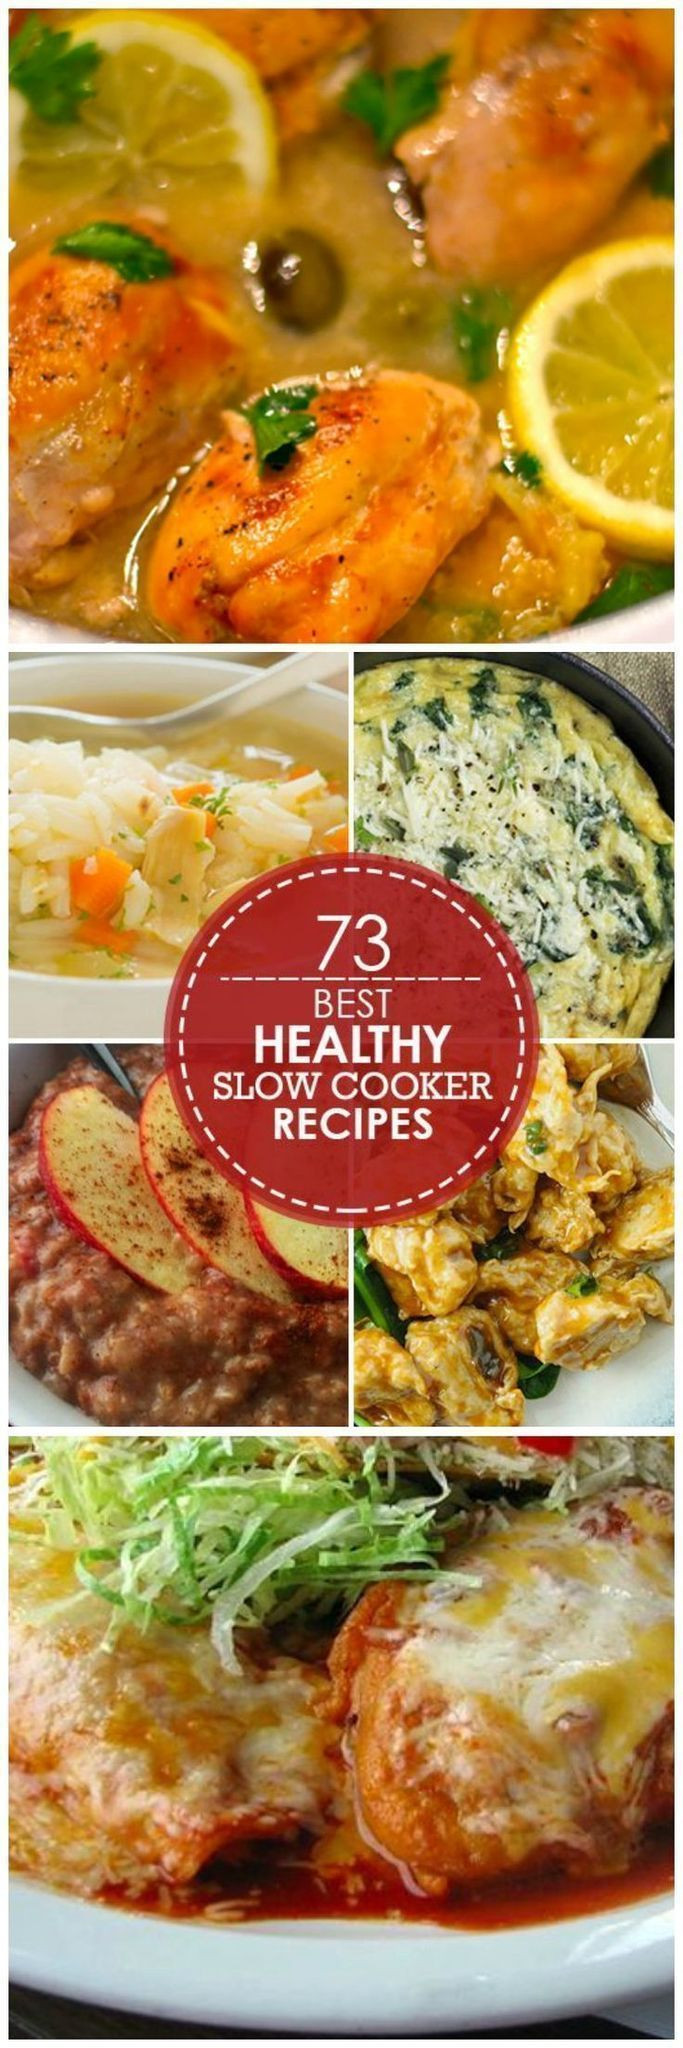 Slow Cooker Heart Healthy Recipes
 73 Best Slow Cooker Recipes